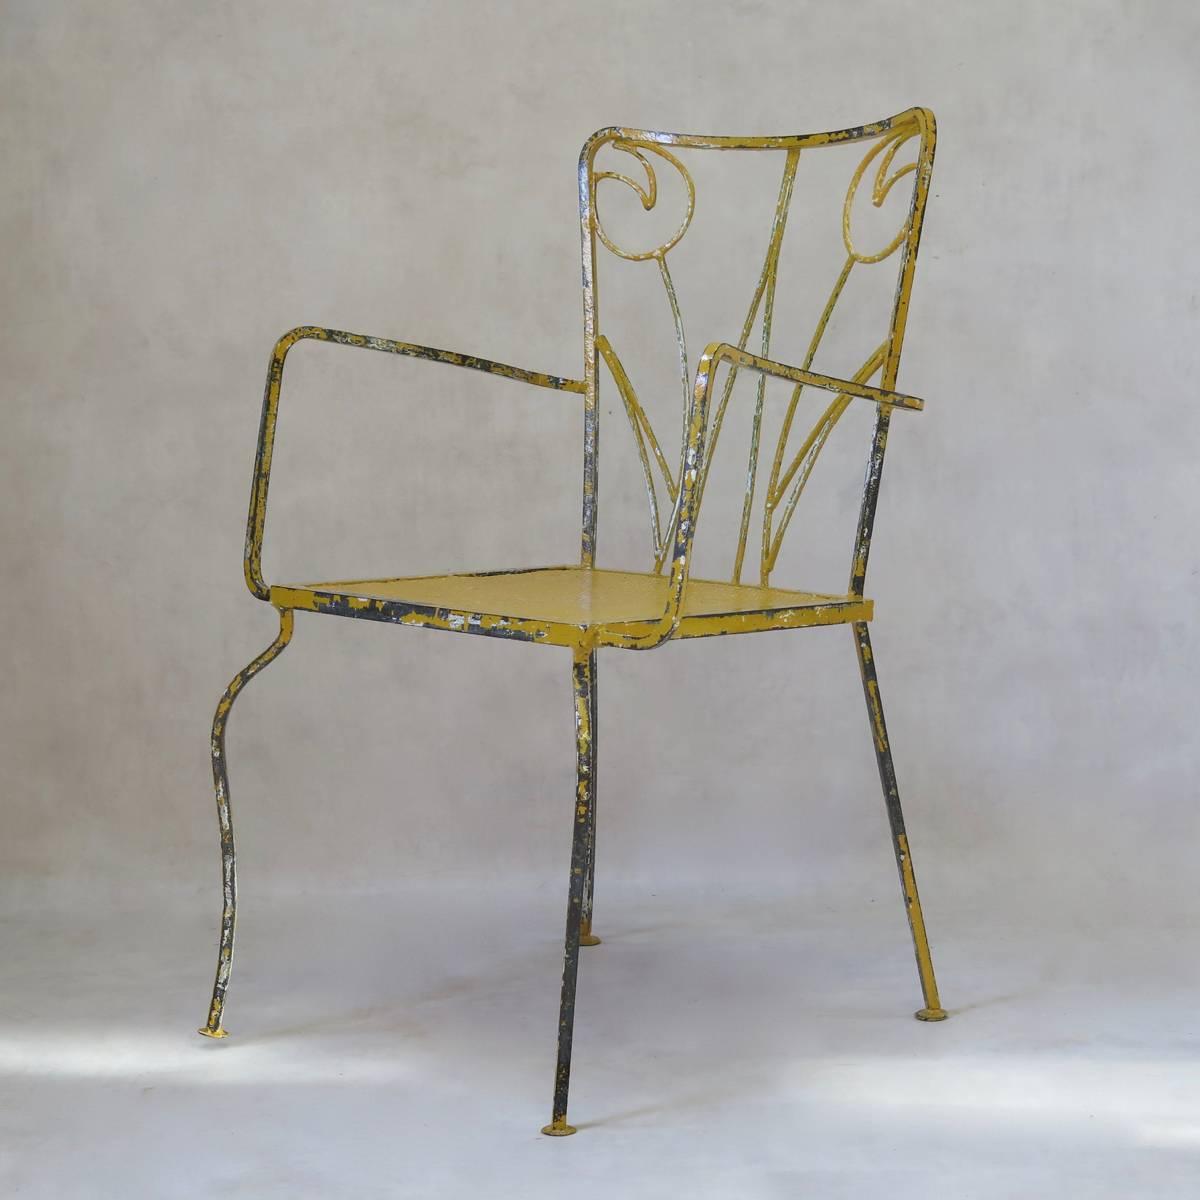 Fun and unusual set of four iron armchairs, painted yellow, with tulip motifs on the backs. The seats are of perforated sheet metal.